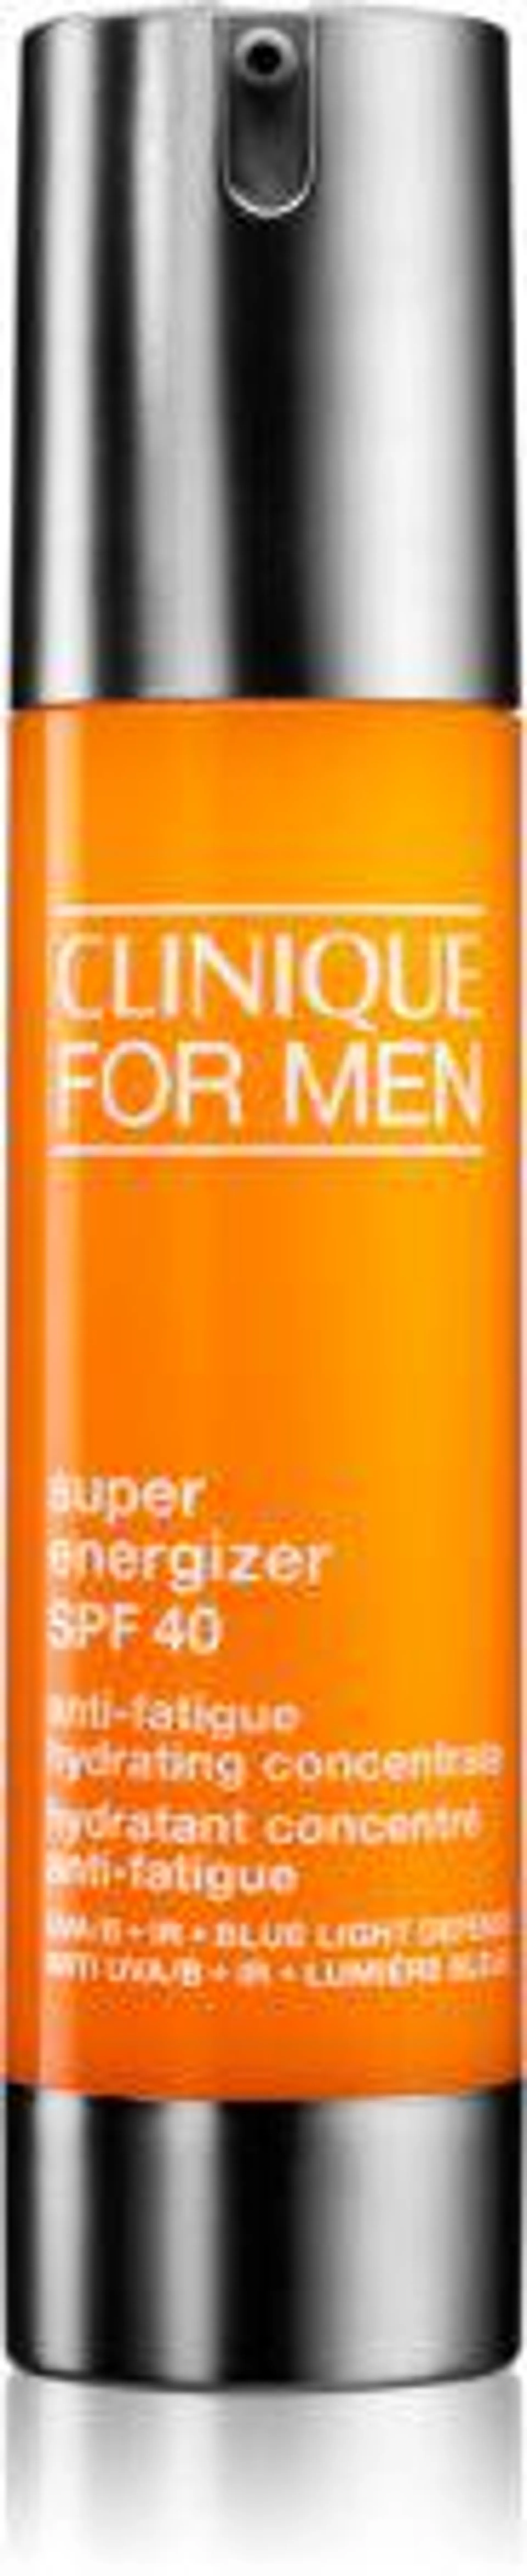 For Men™ Super Energizer™ SPF 40 Anti-Fatigue Hydrating Concentrate